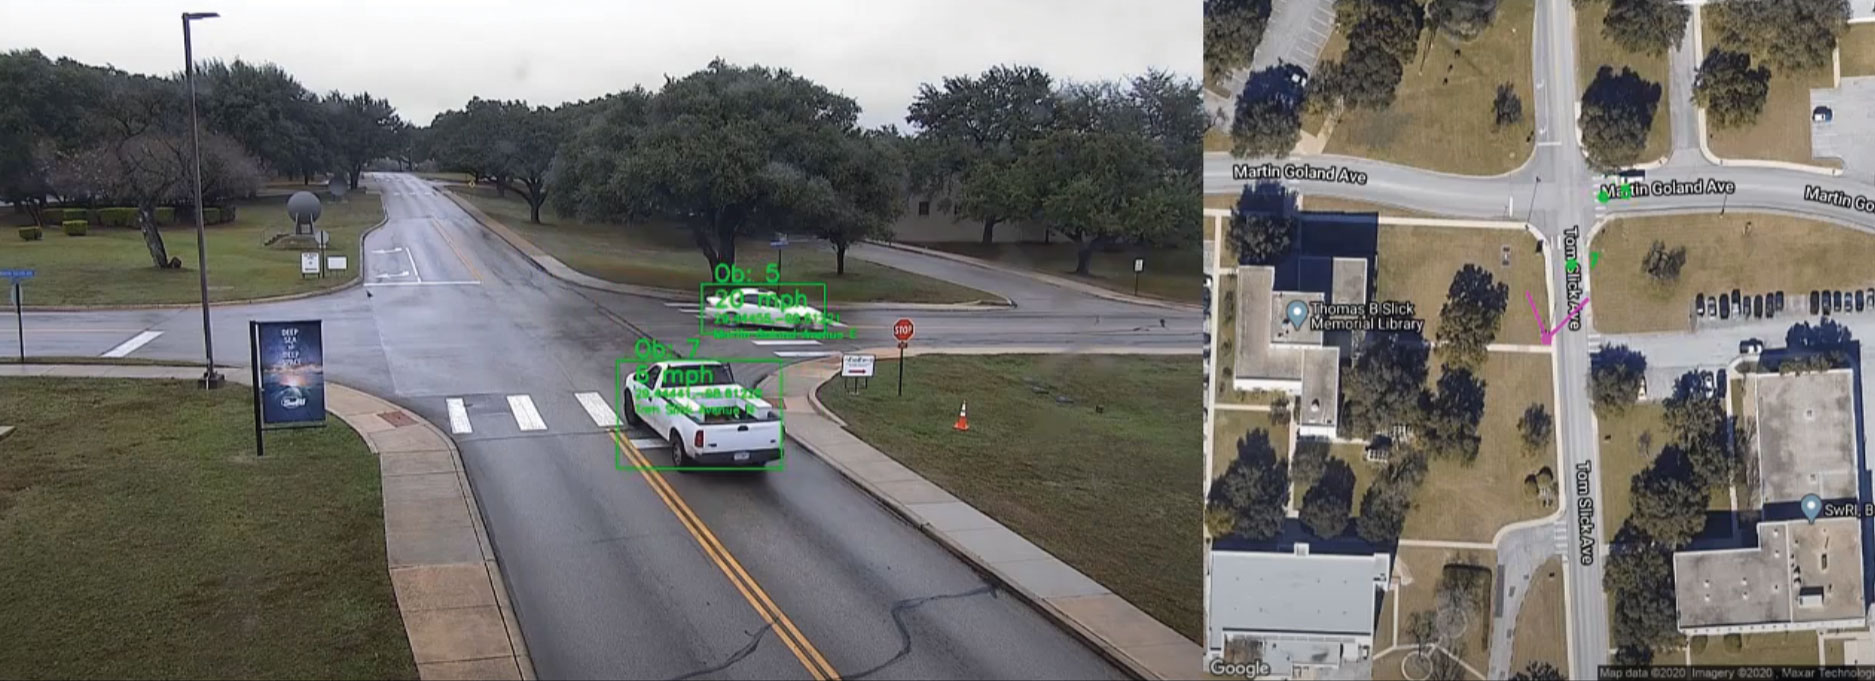 SwRI’s Active-Vision™ system tracking and sharing trajectory information on two vehicles at a 4-way intersection